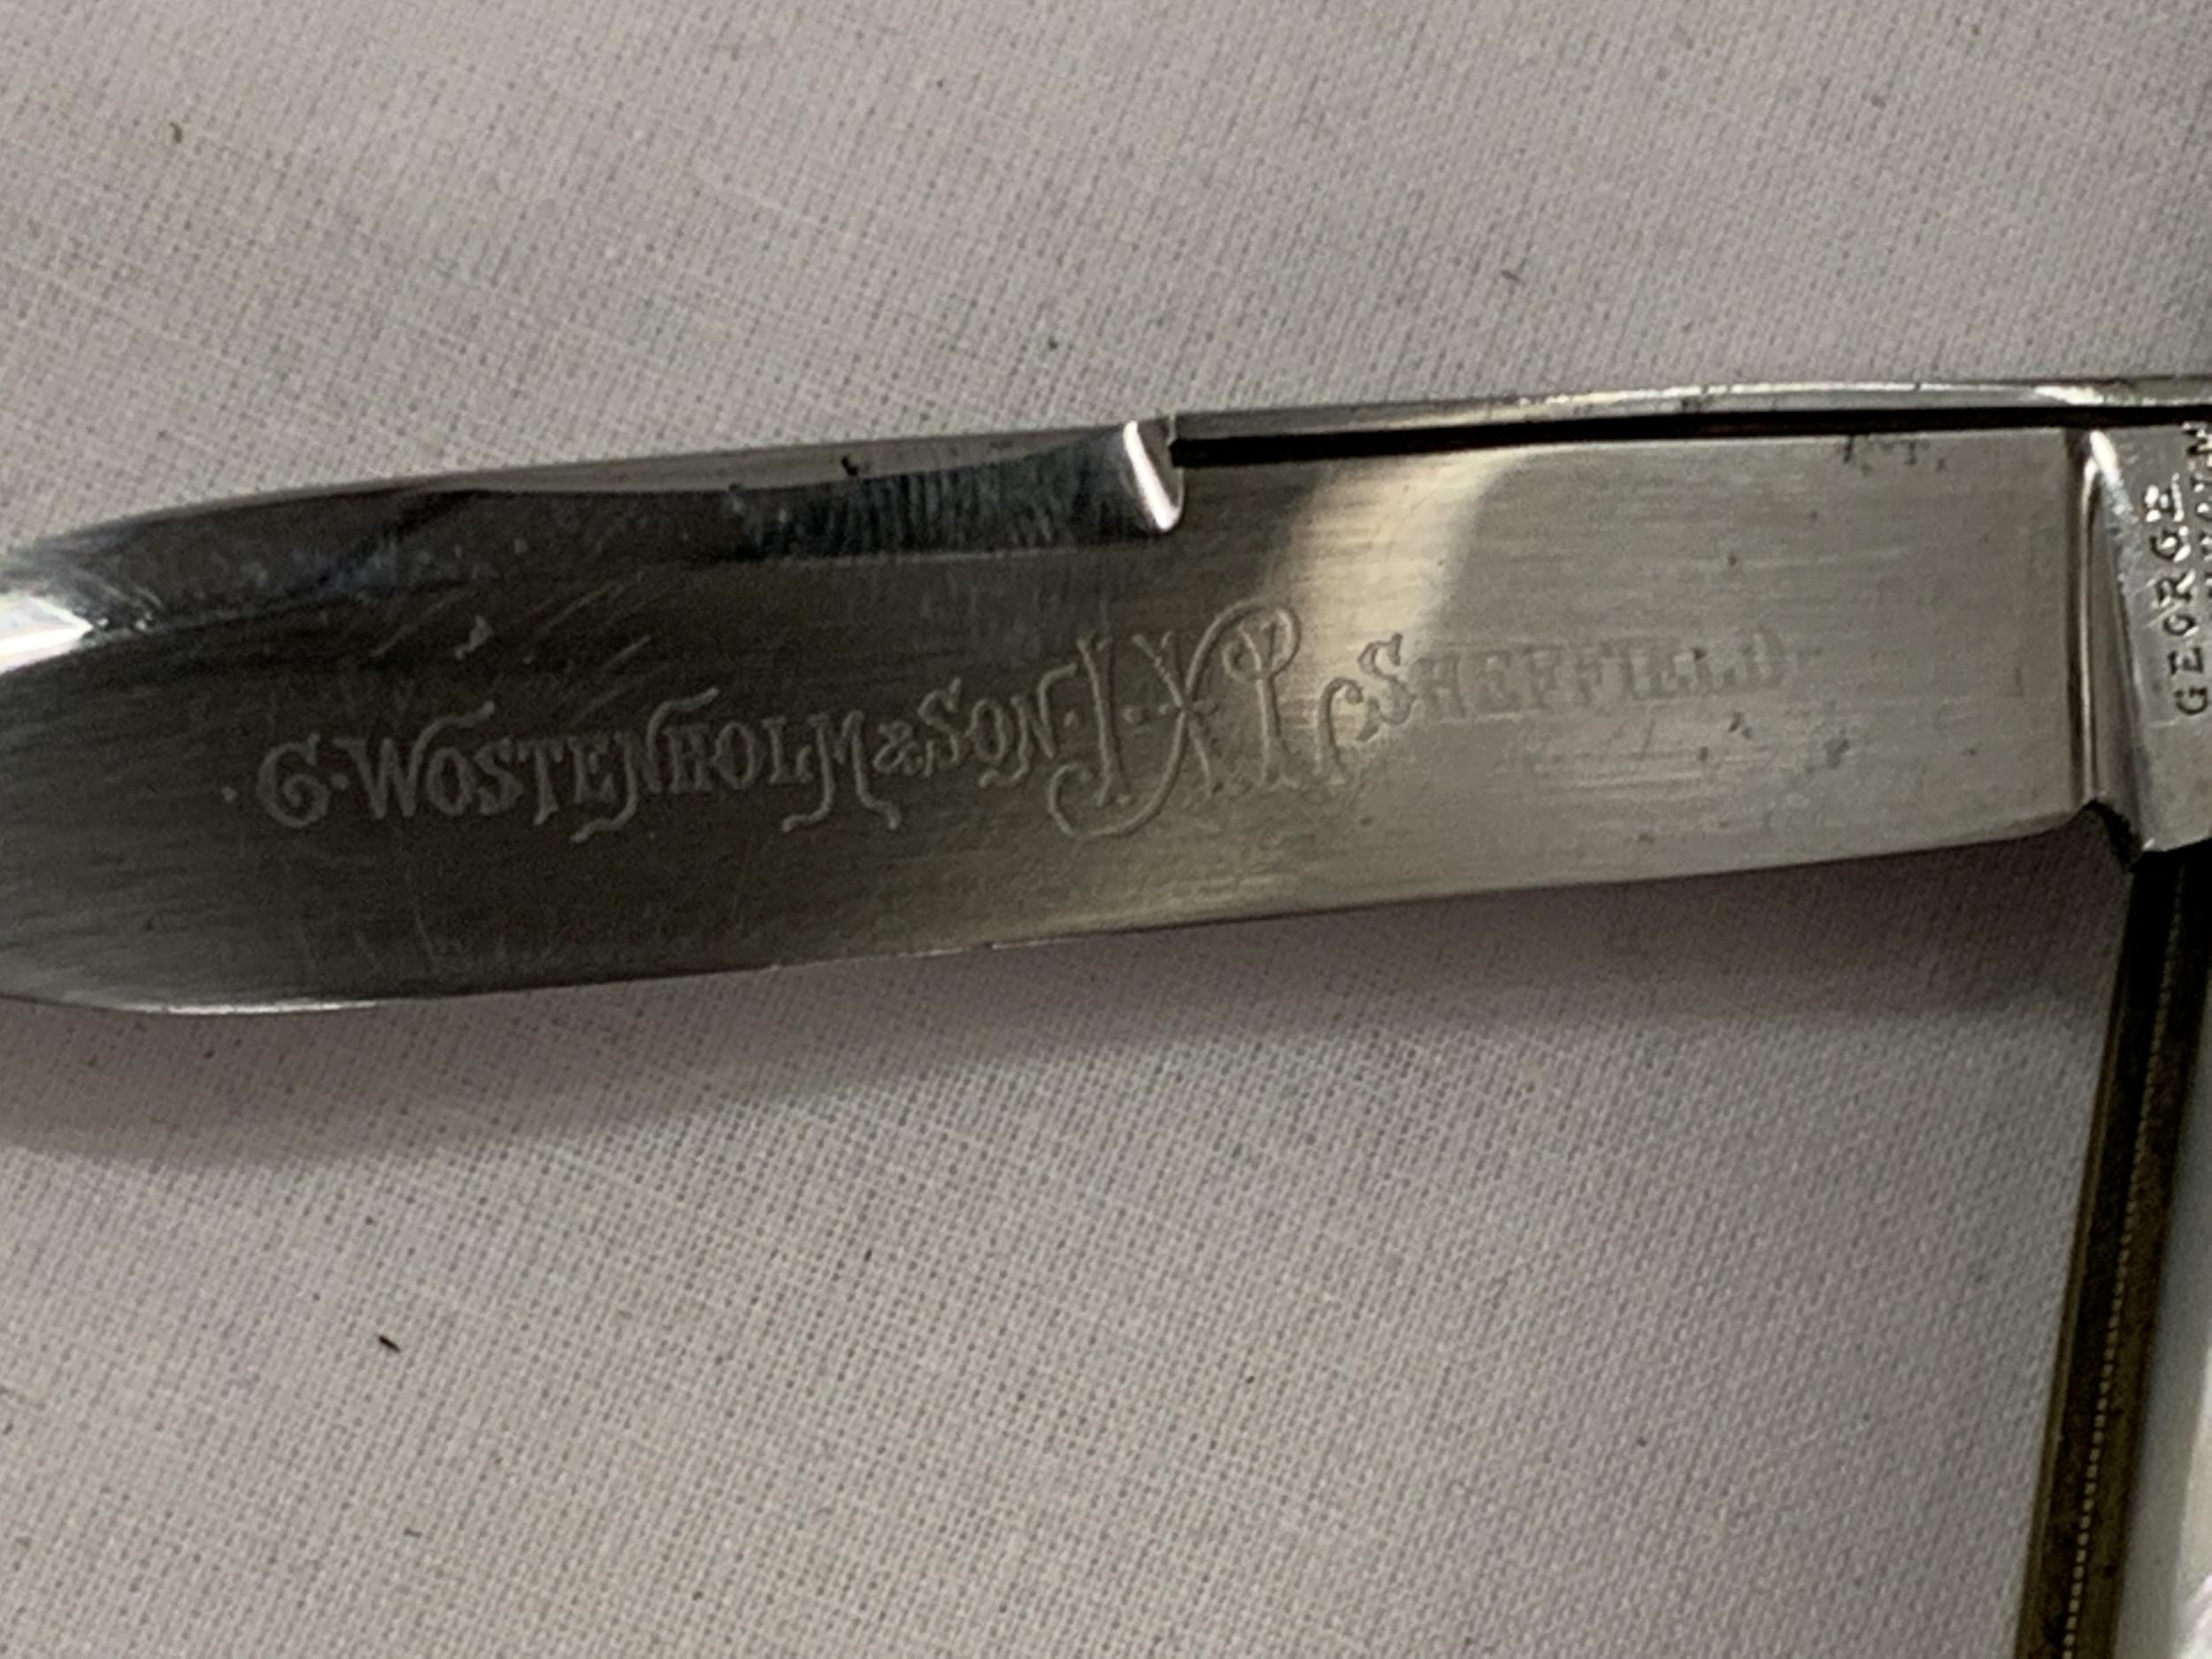 A GEORGE WOSTENHOLM & SON, SHEFFIELD MOTHER OF PEARL PEN KNIFE - Image 3 of 4